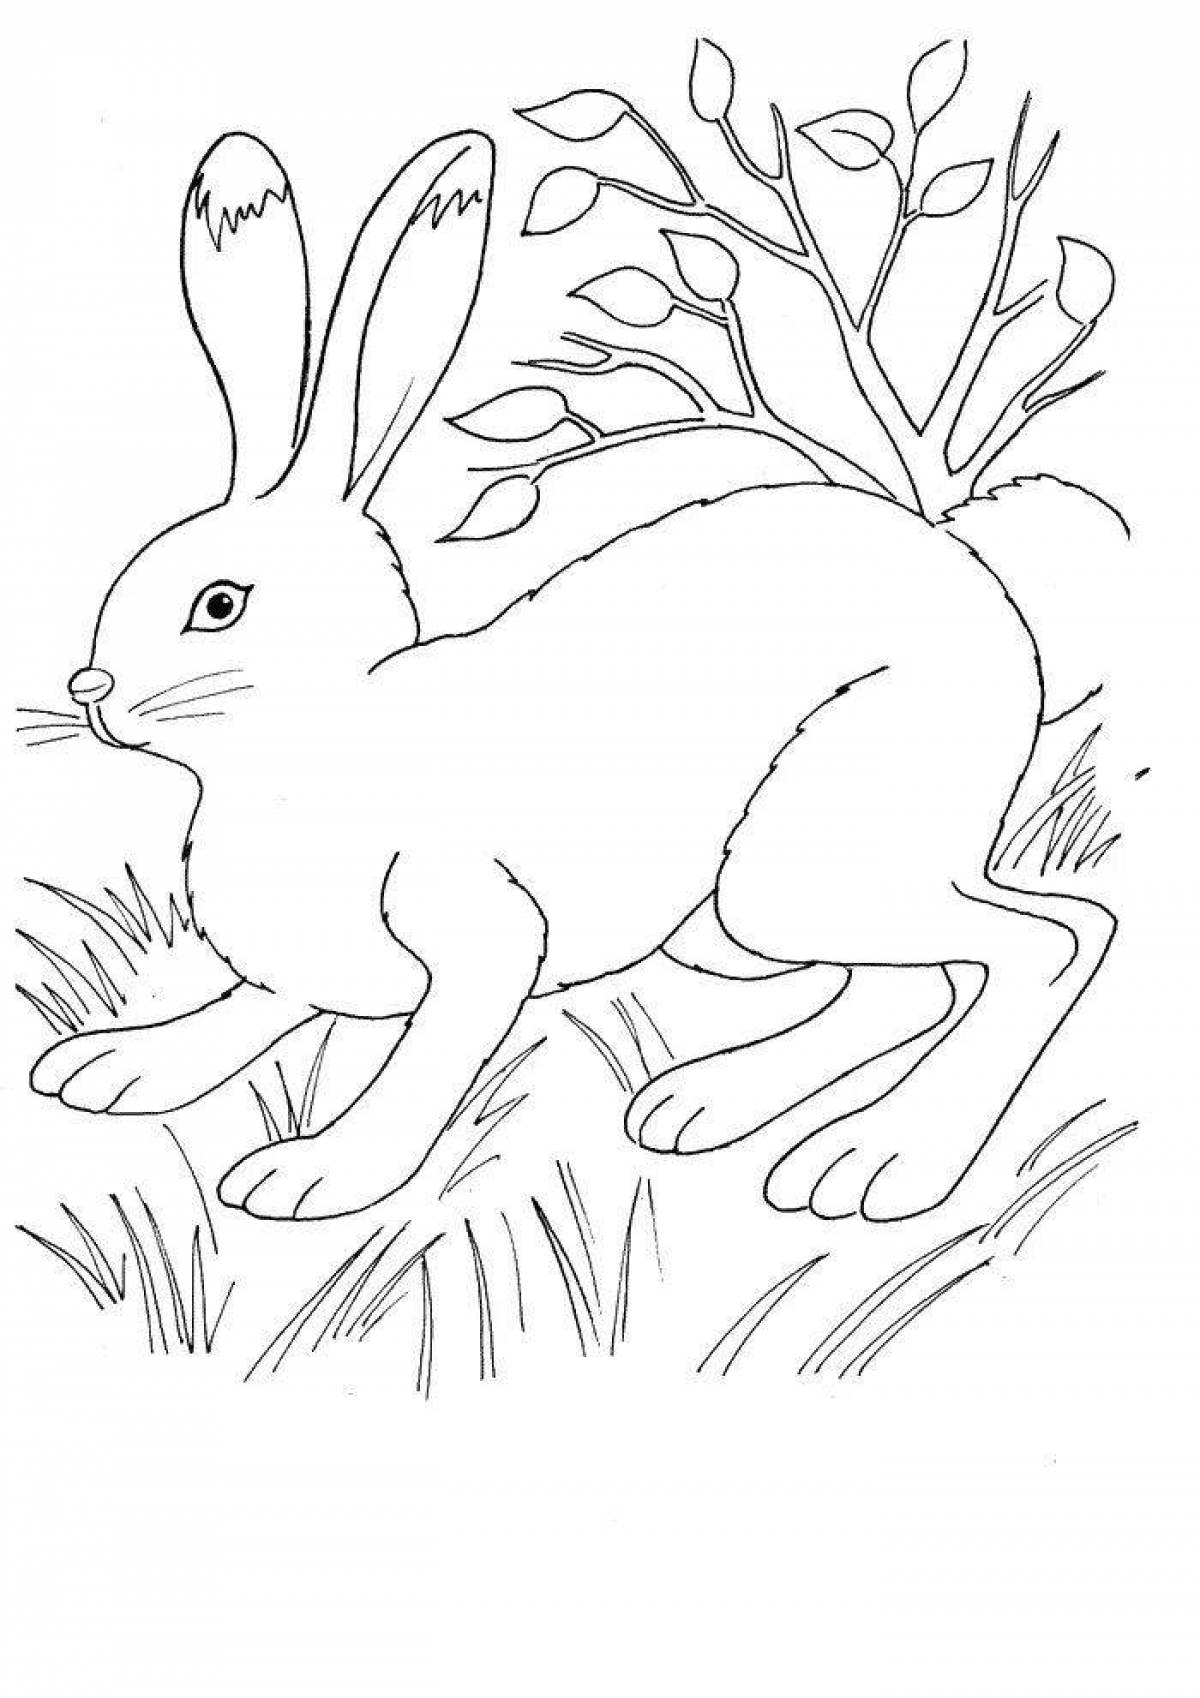 Coloring book shiny white hare